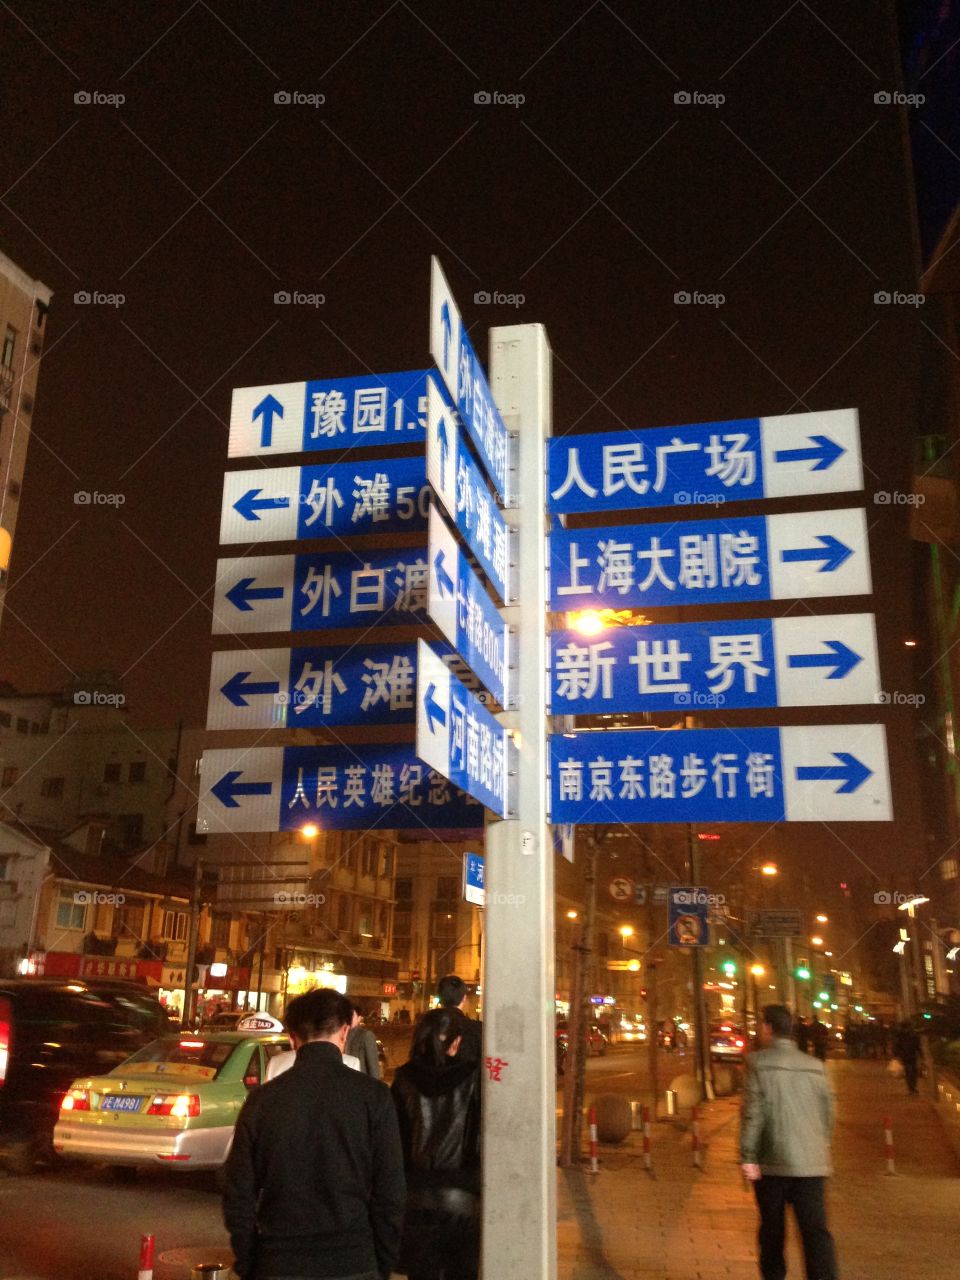 Directions. Street signs in Shanghai, China